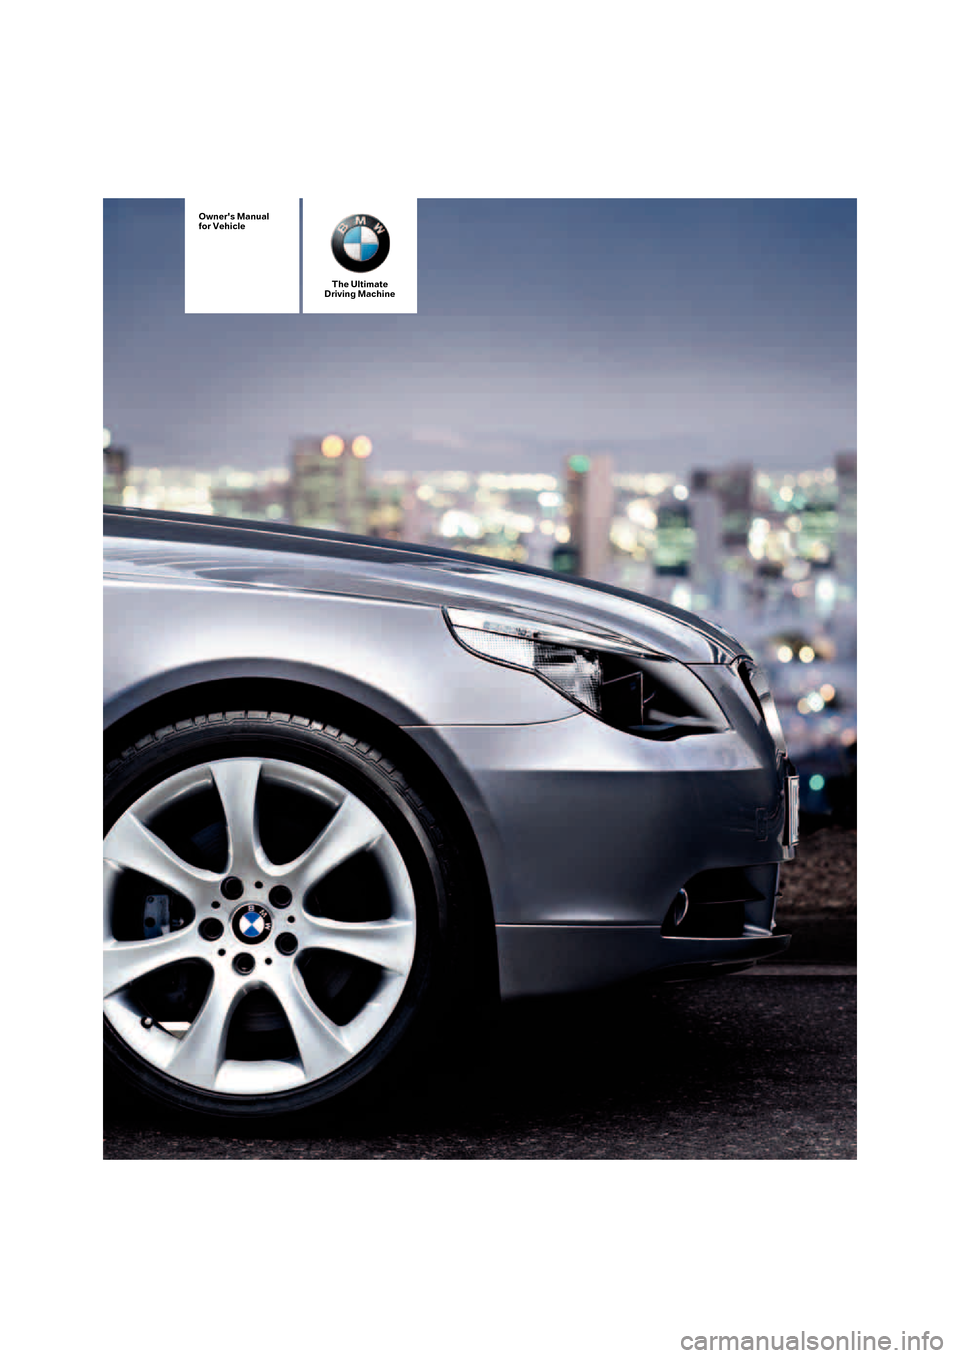 BMW 550I SEDAN 2006 E60 Owners Manual The Ultimate
Driving Machine
Owners Manual
for Vehicle 